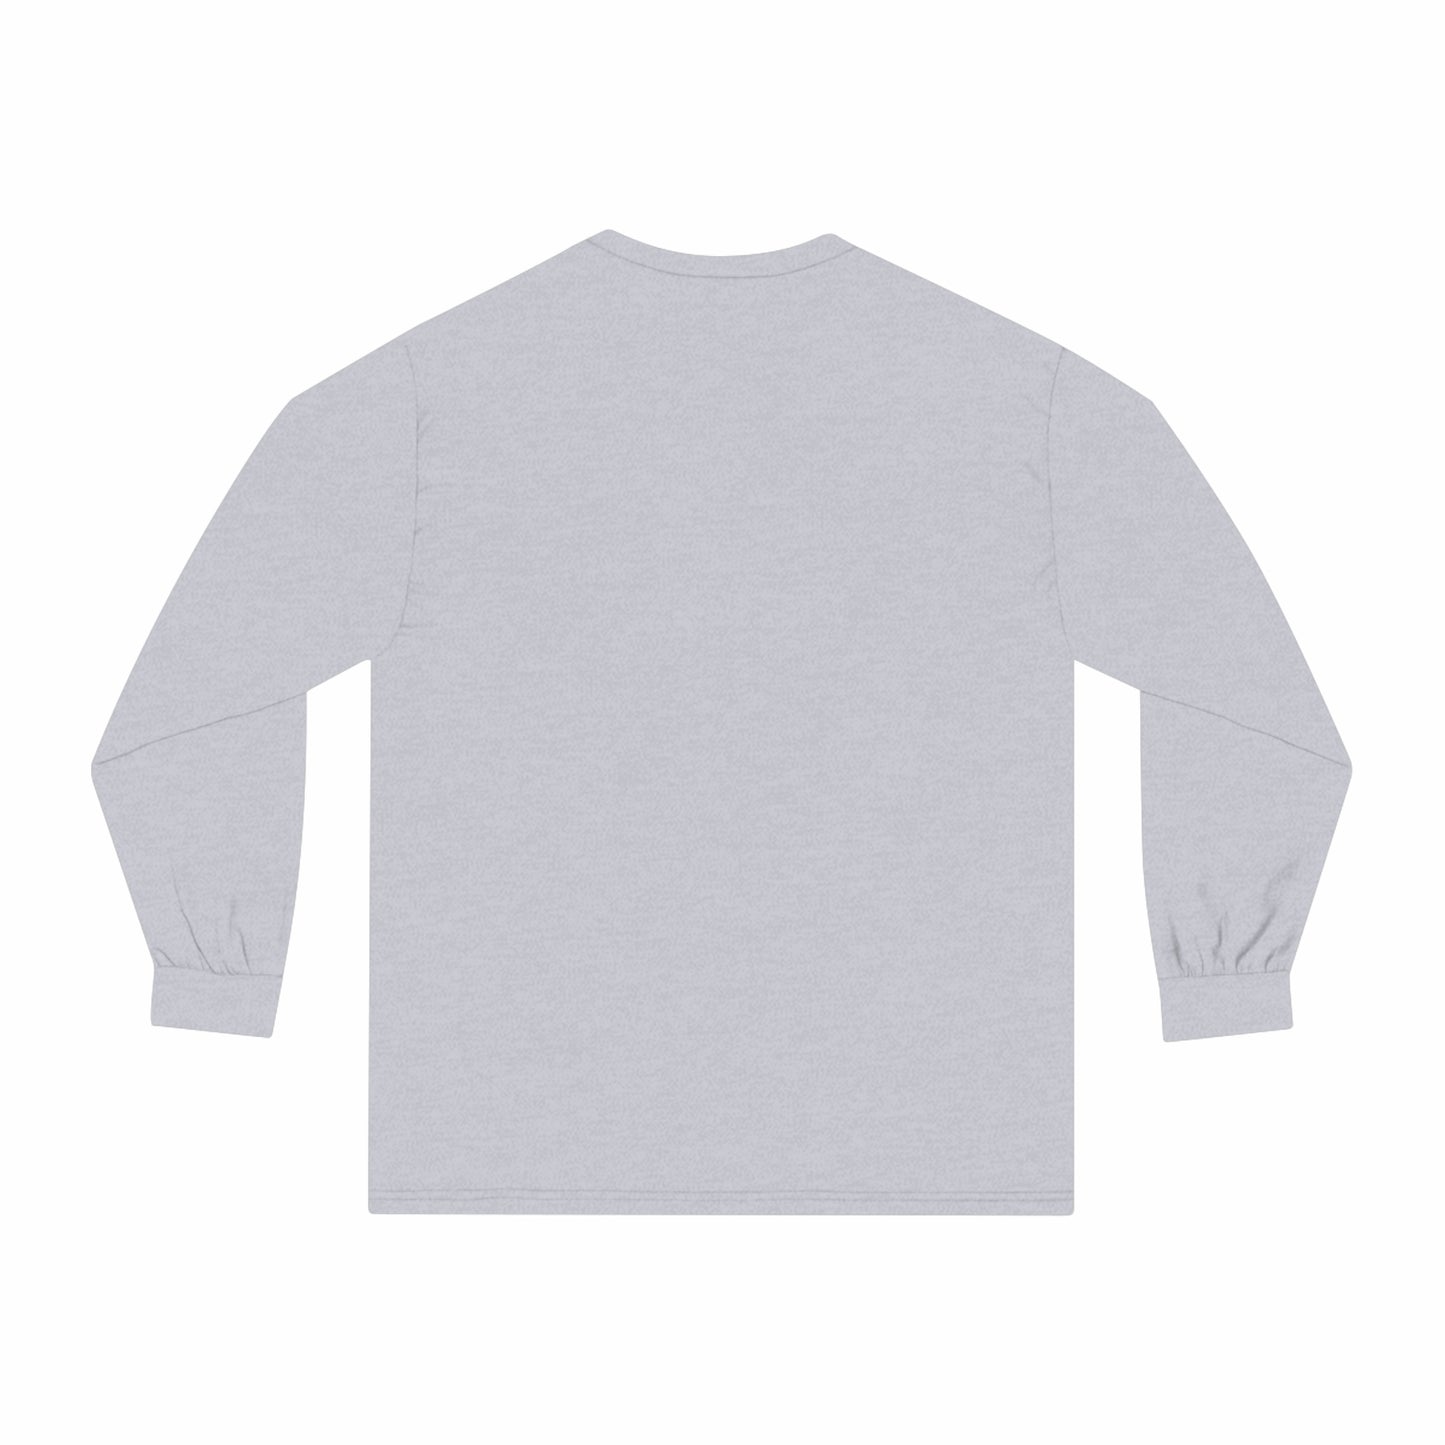 Kasi Currie Classic Long Sleeve T-Shirt